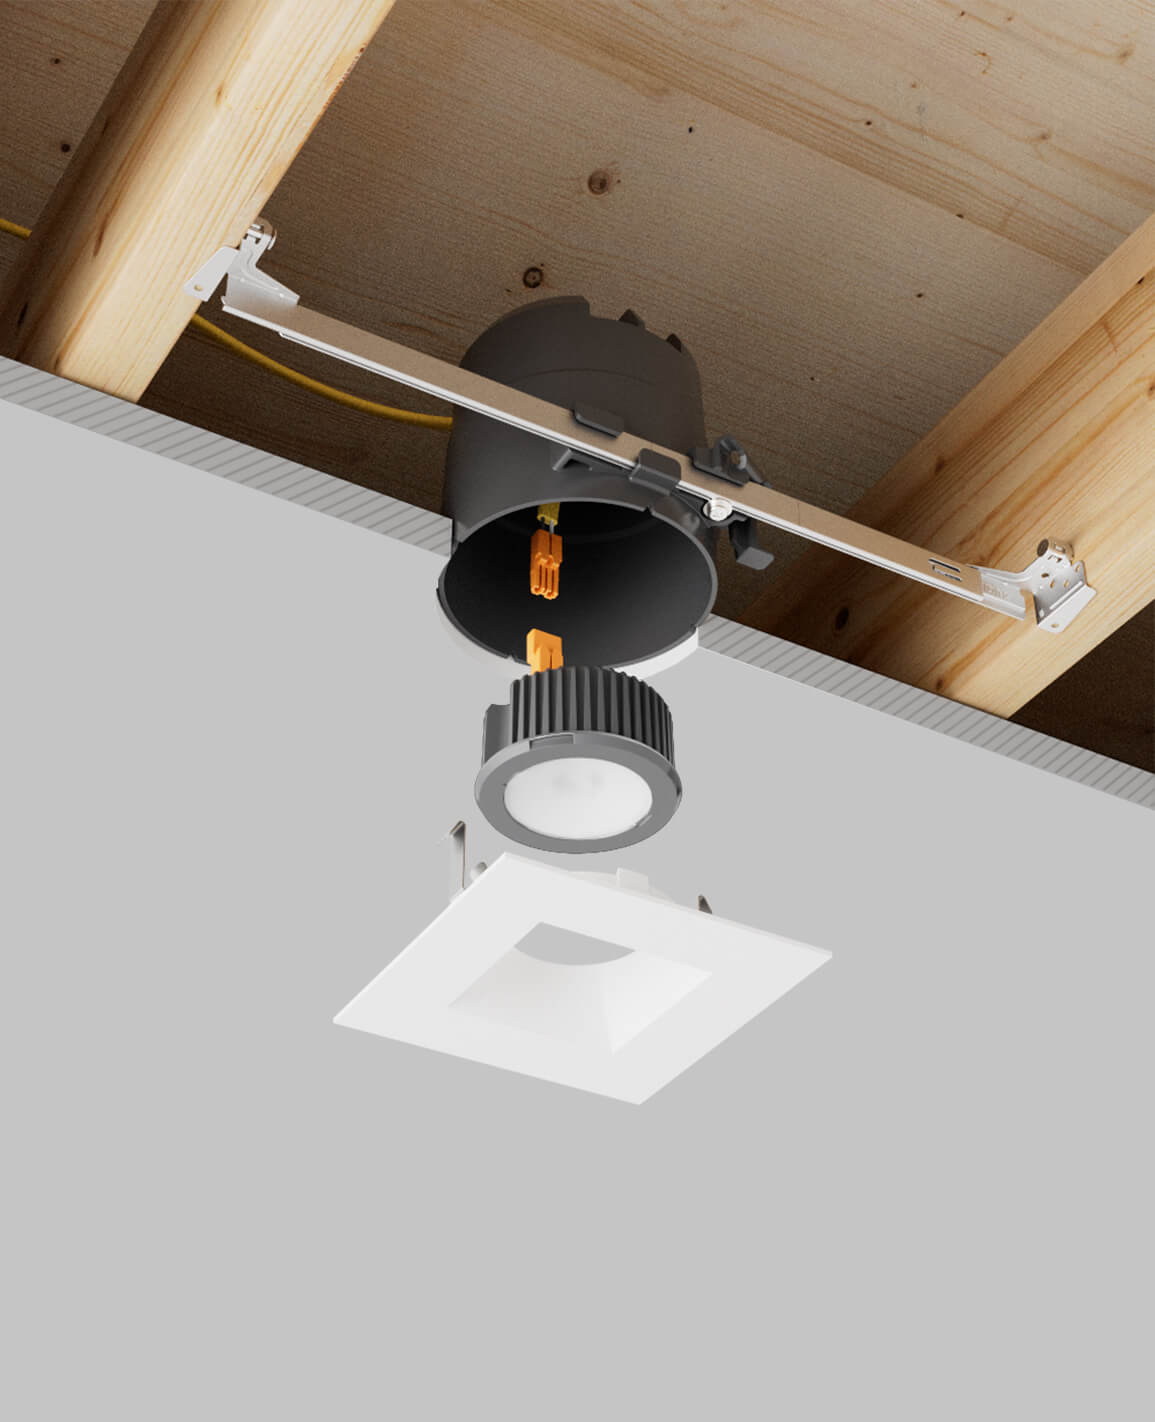 LUSA 4" recessed light with bar hangers housing and white square trim